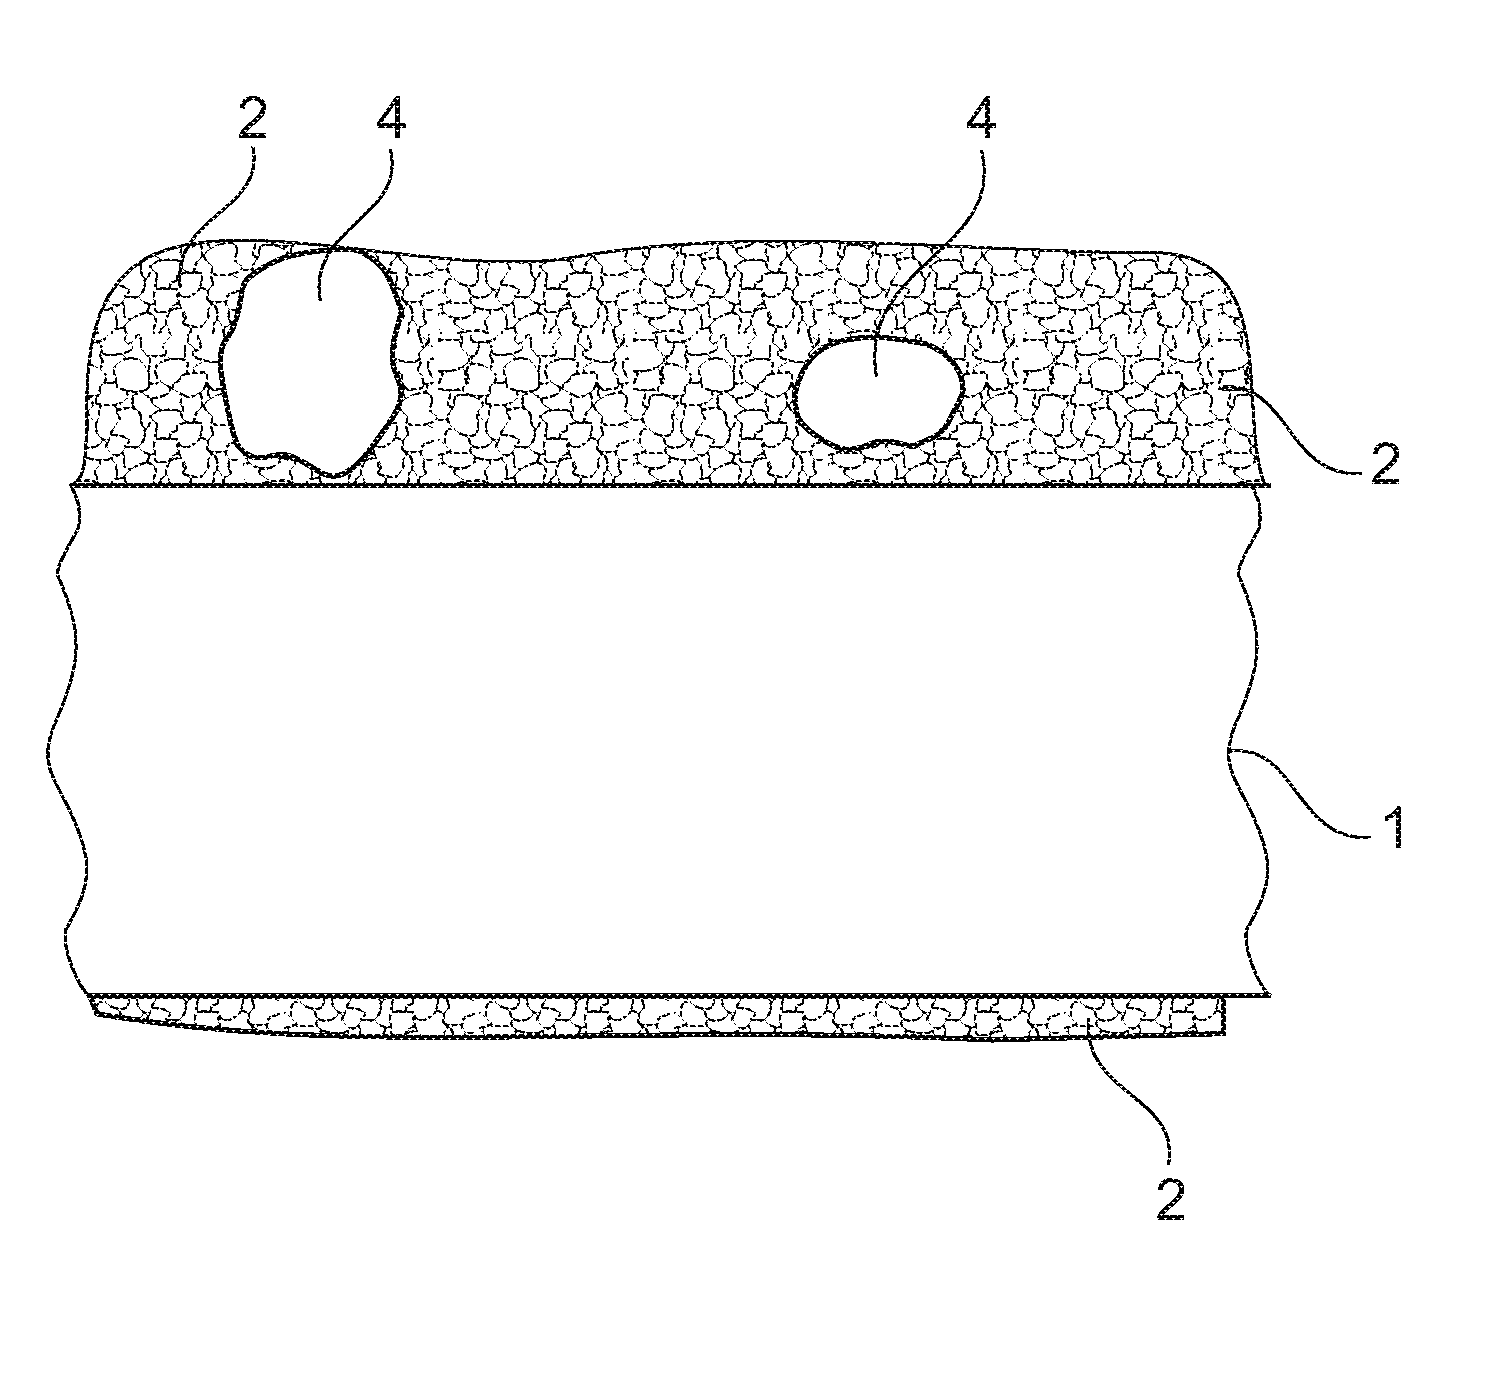 Braze foil for high-temperature brazing and methods for repairing or producing components using a braze foil